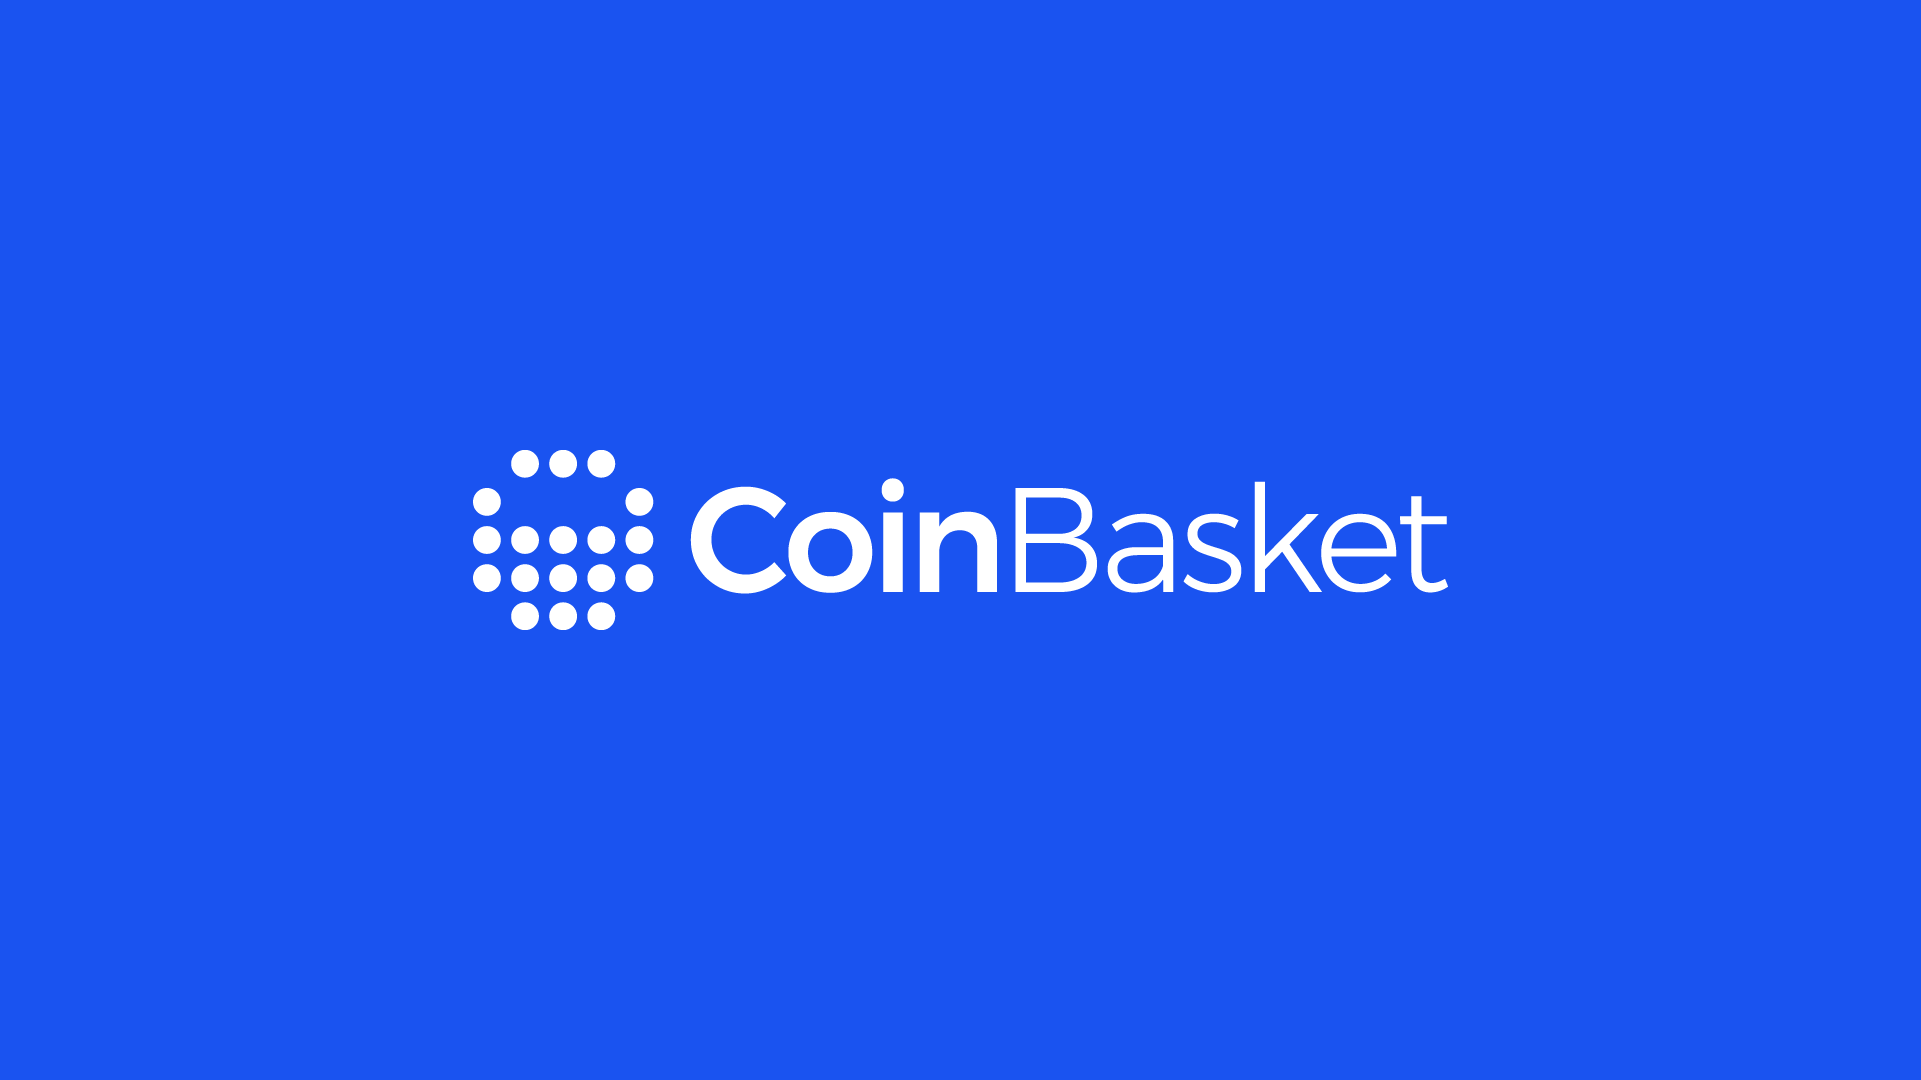 CoinBasket - Crypto Exchange logo, basket shape built with multiple circles, representing diversity and secure crypto transactions